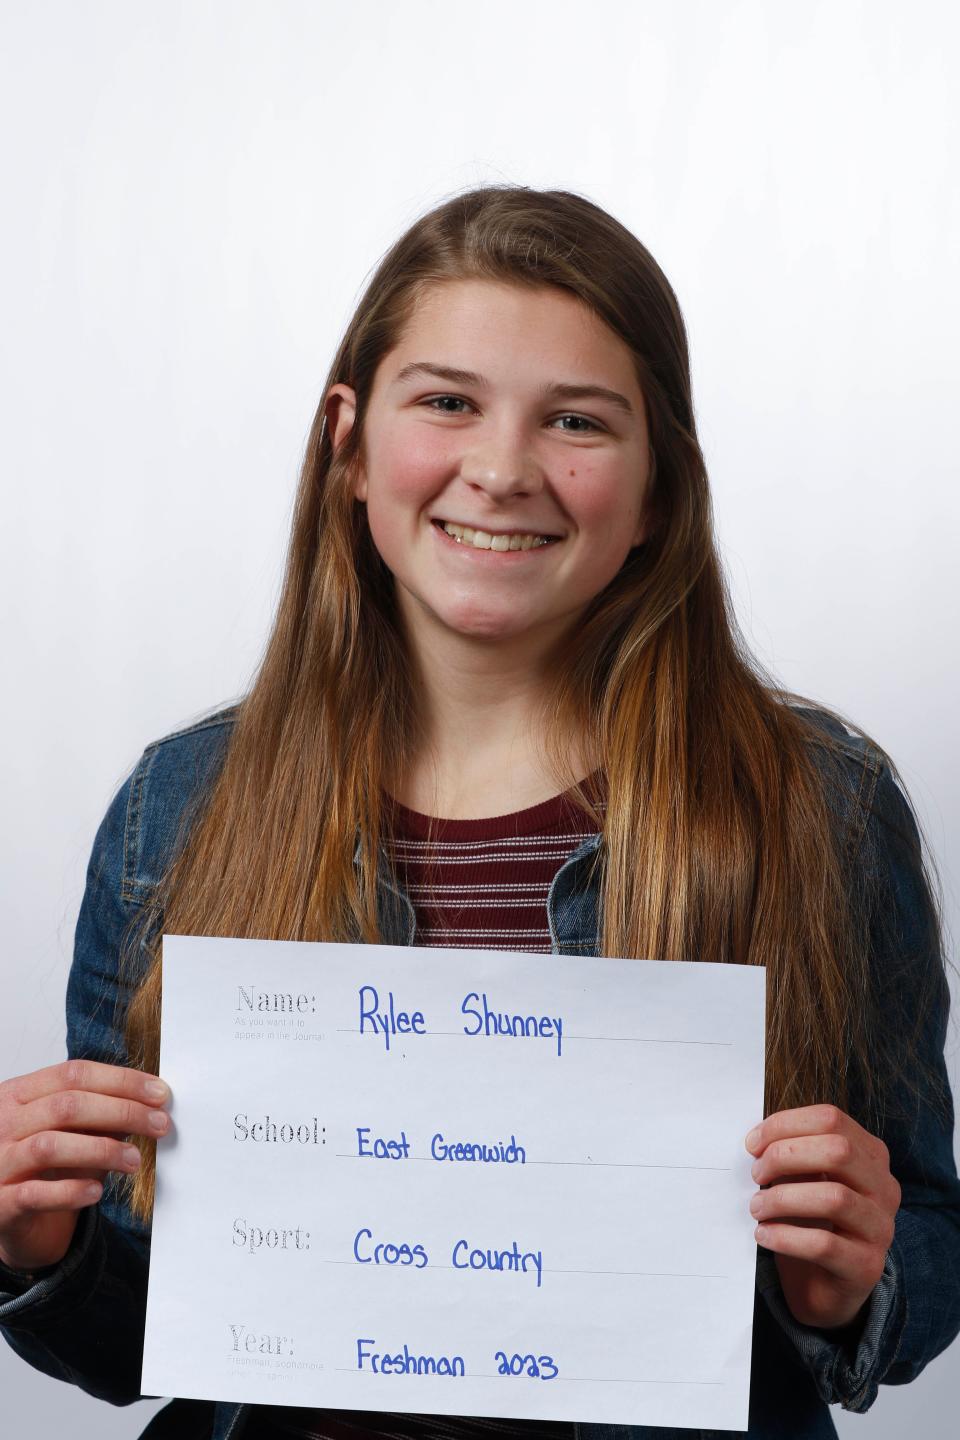 Providence, RI, Jan 9, 2020 - Rylee Shunney, East Greenwich, Cross County, Freshman.  All-States photo shoot Allstate All State. [The Providence Journal / Kris Craig]